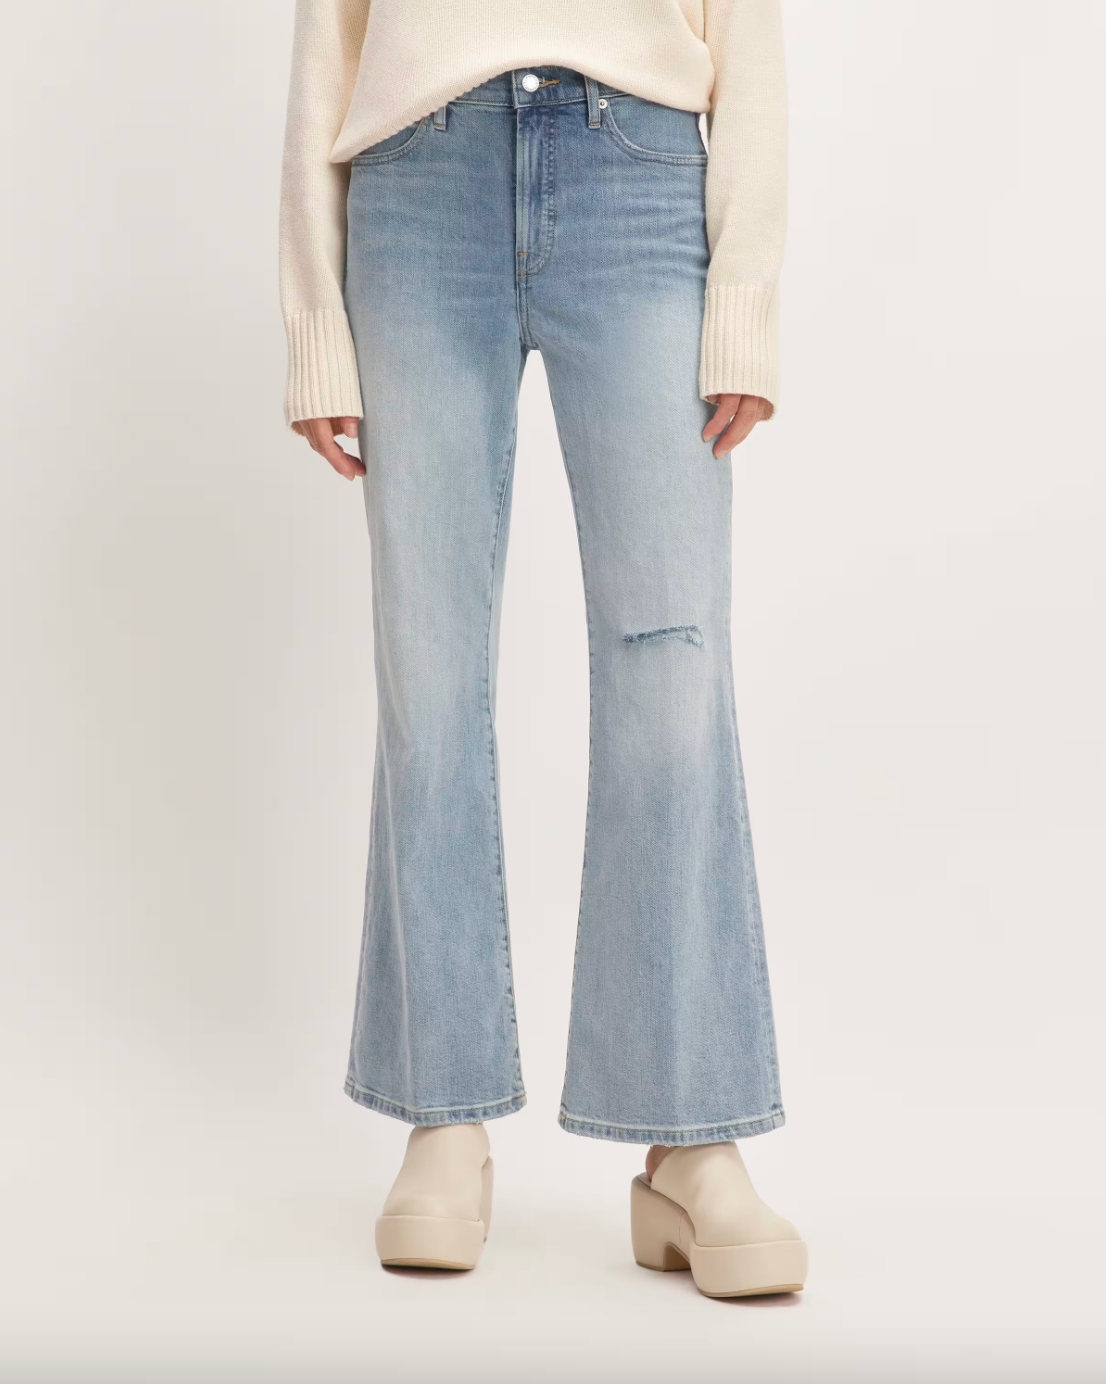 The High-Rise Flare Jean